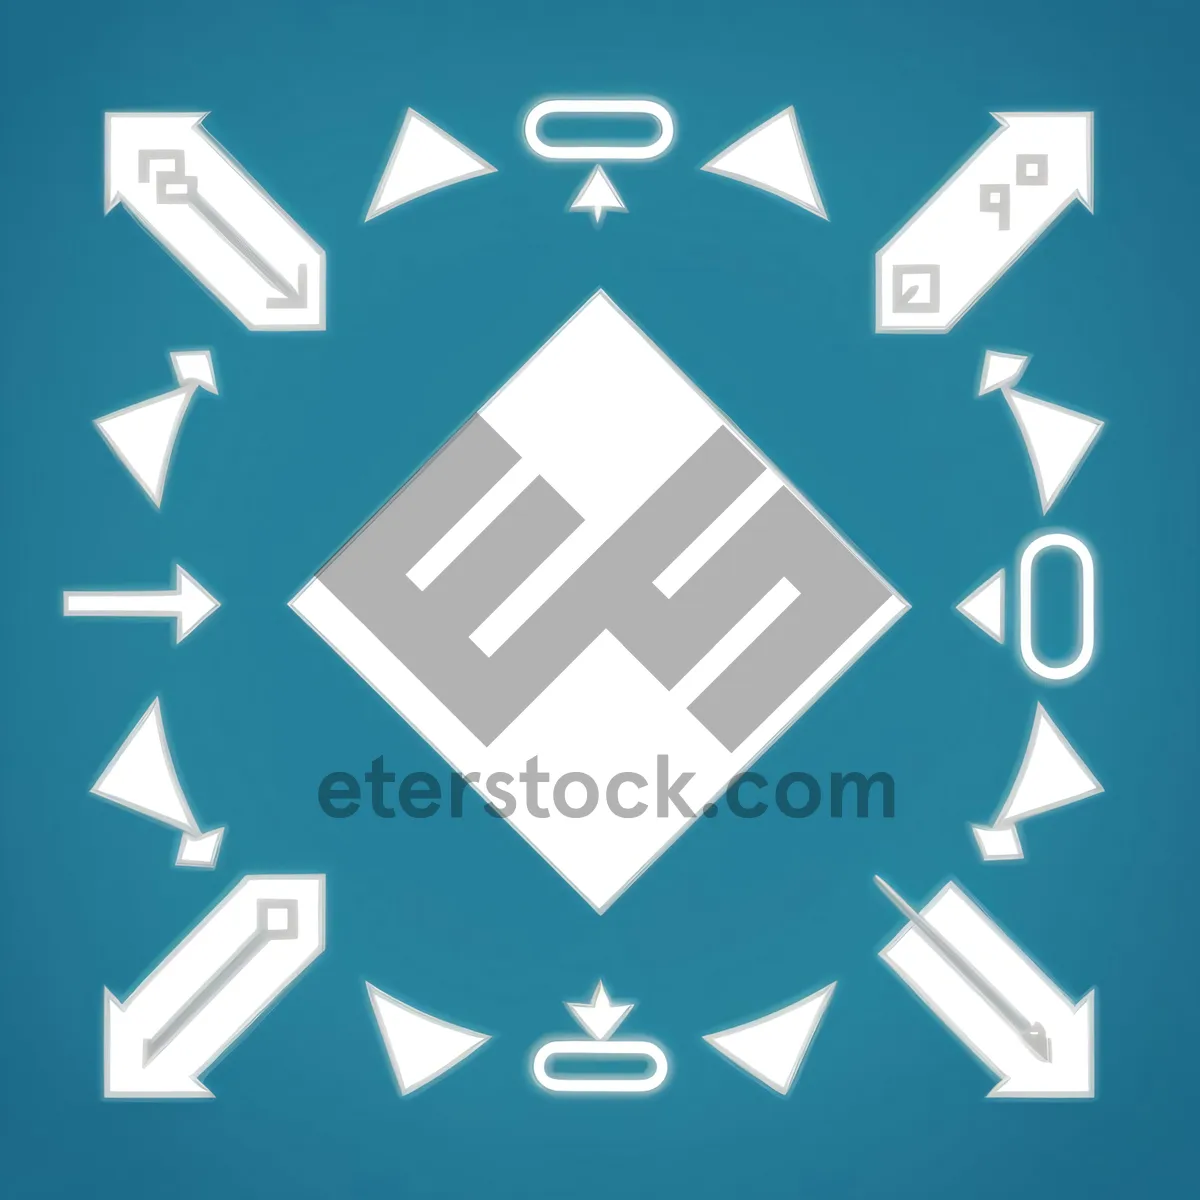 Picture of Heraldic Icon Series: Web Buttons with Graphic Symbols